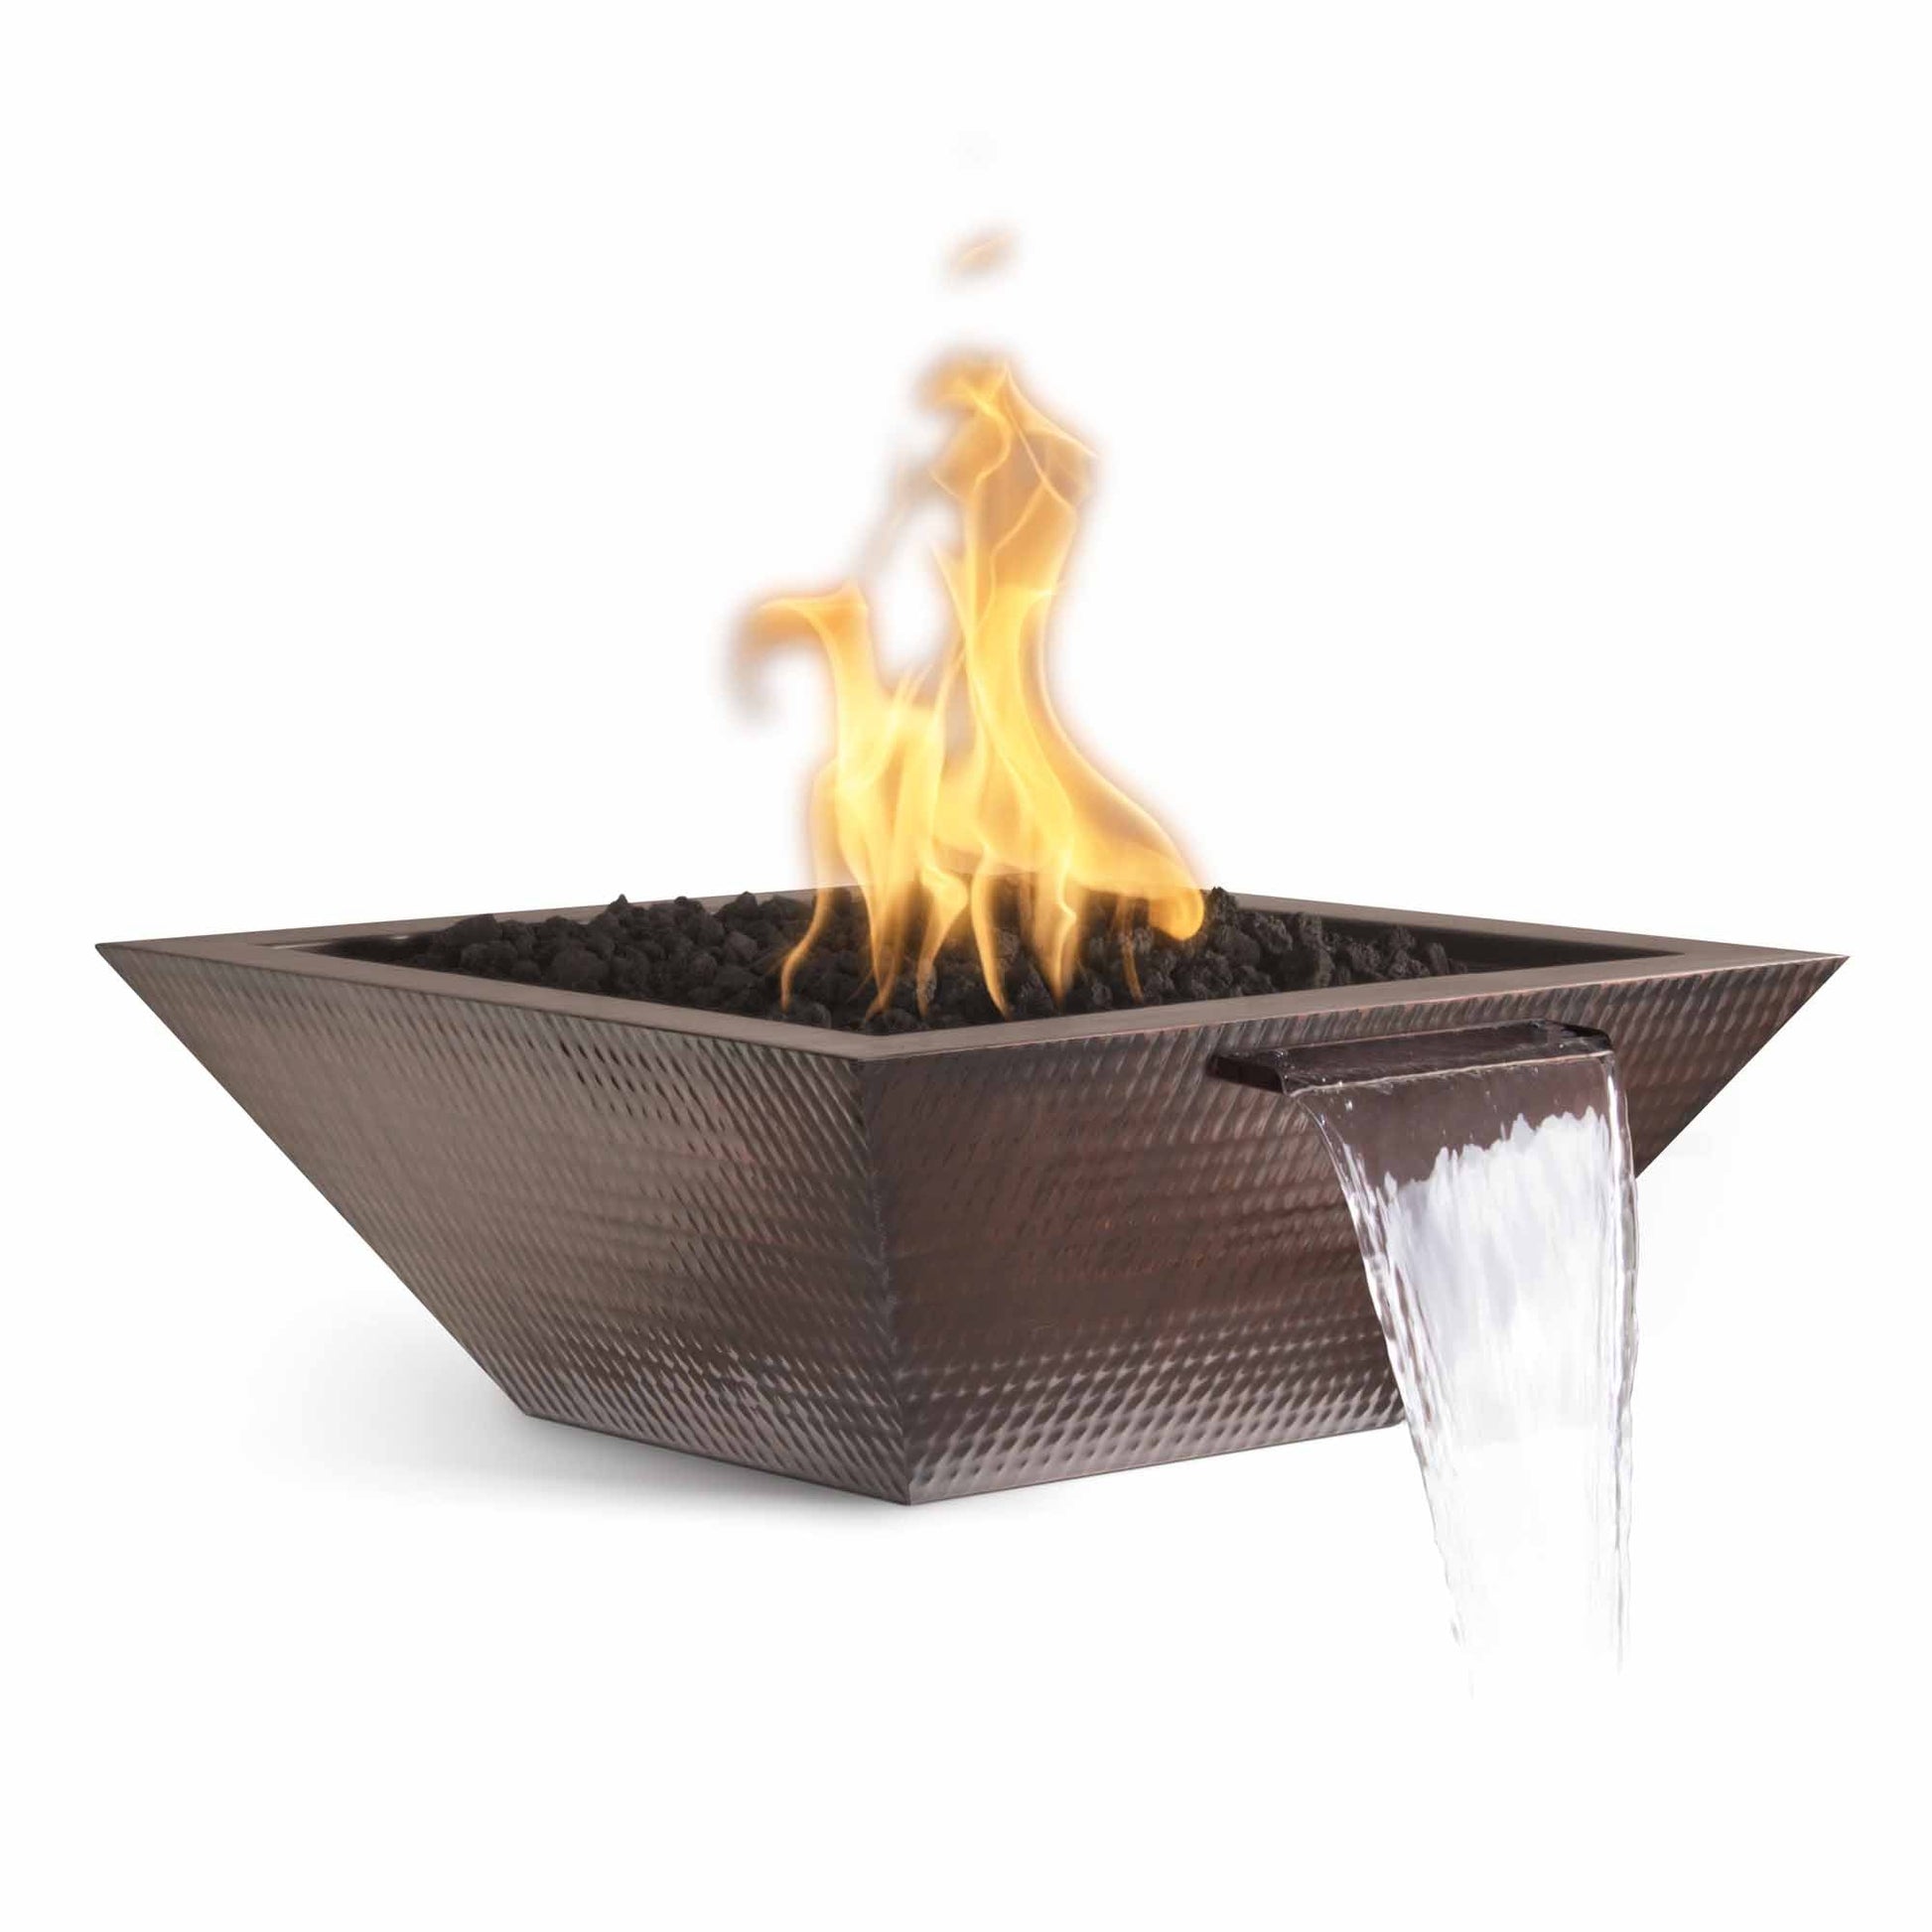 The Outdoor Plus Square Maya 24" Copper Liquid Propane Fire & Water Bowl with Match Lit with Flame Sense Ignition